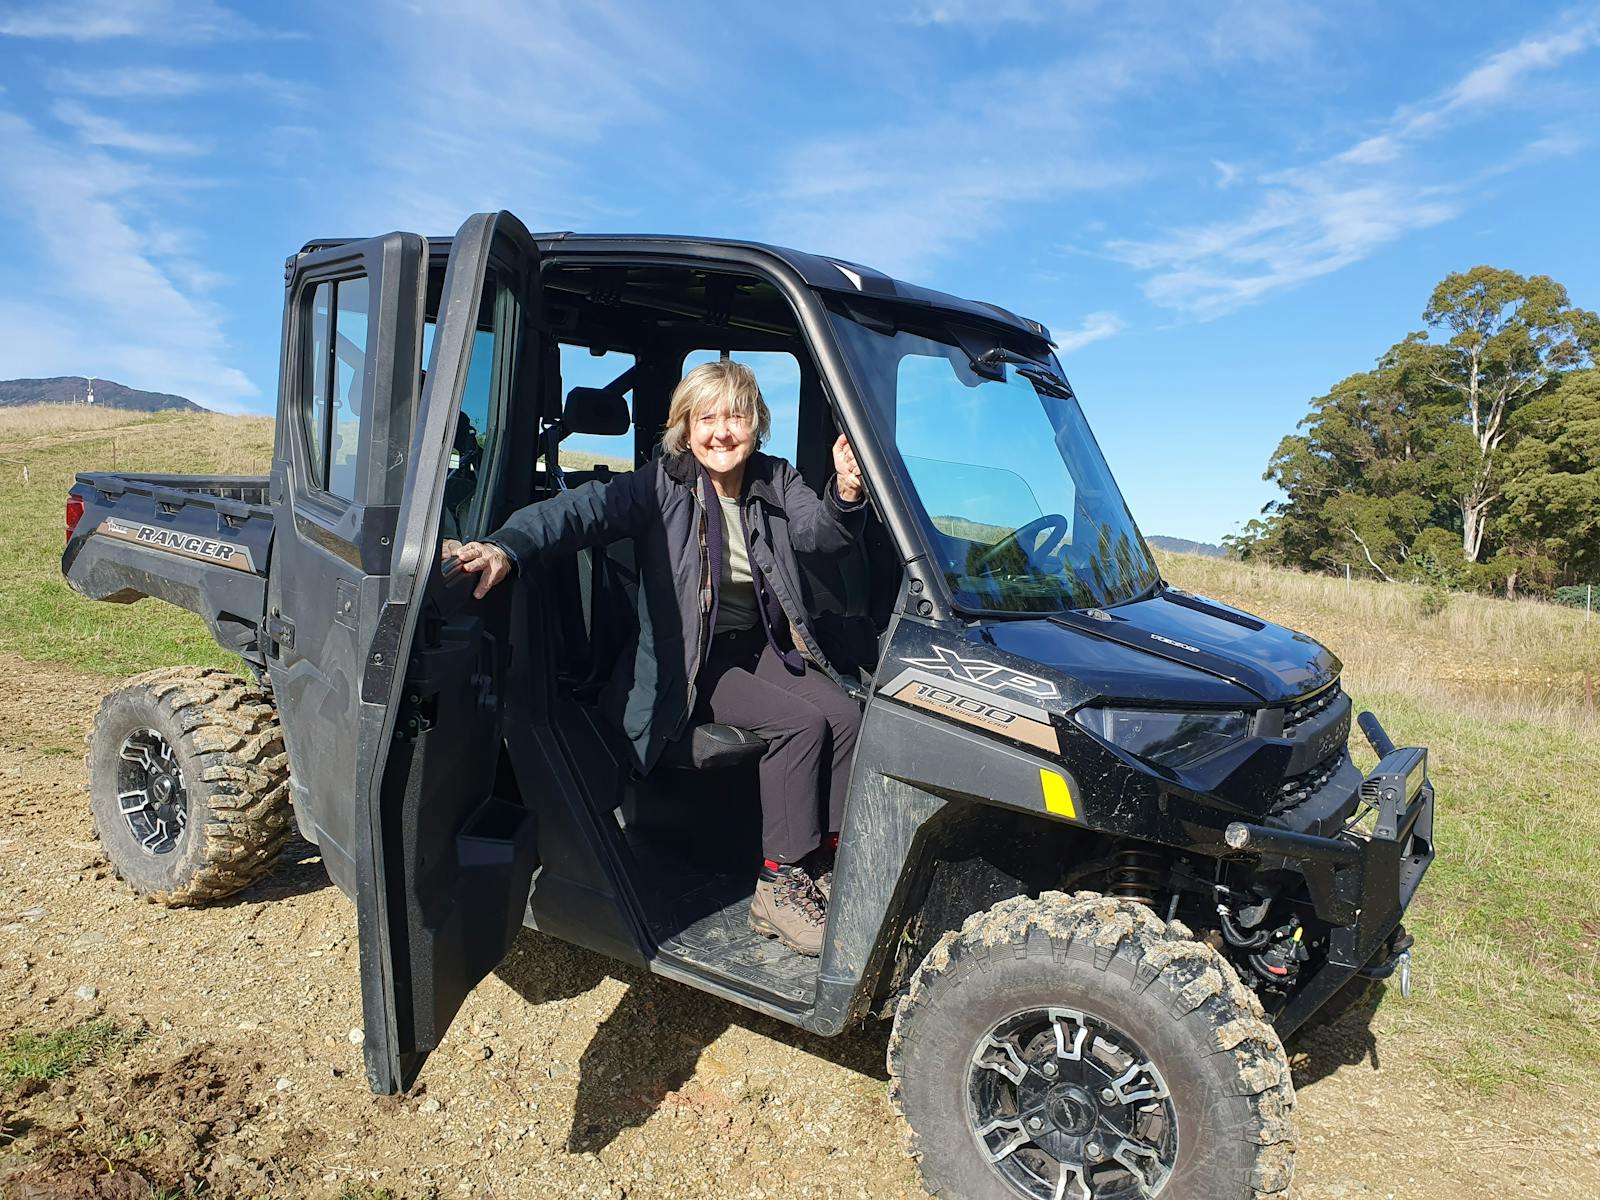 Woman sitting in front seat of ATV with door open and smiling